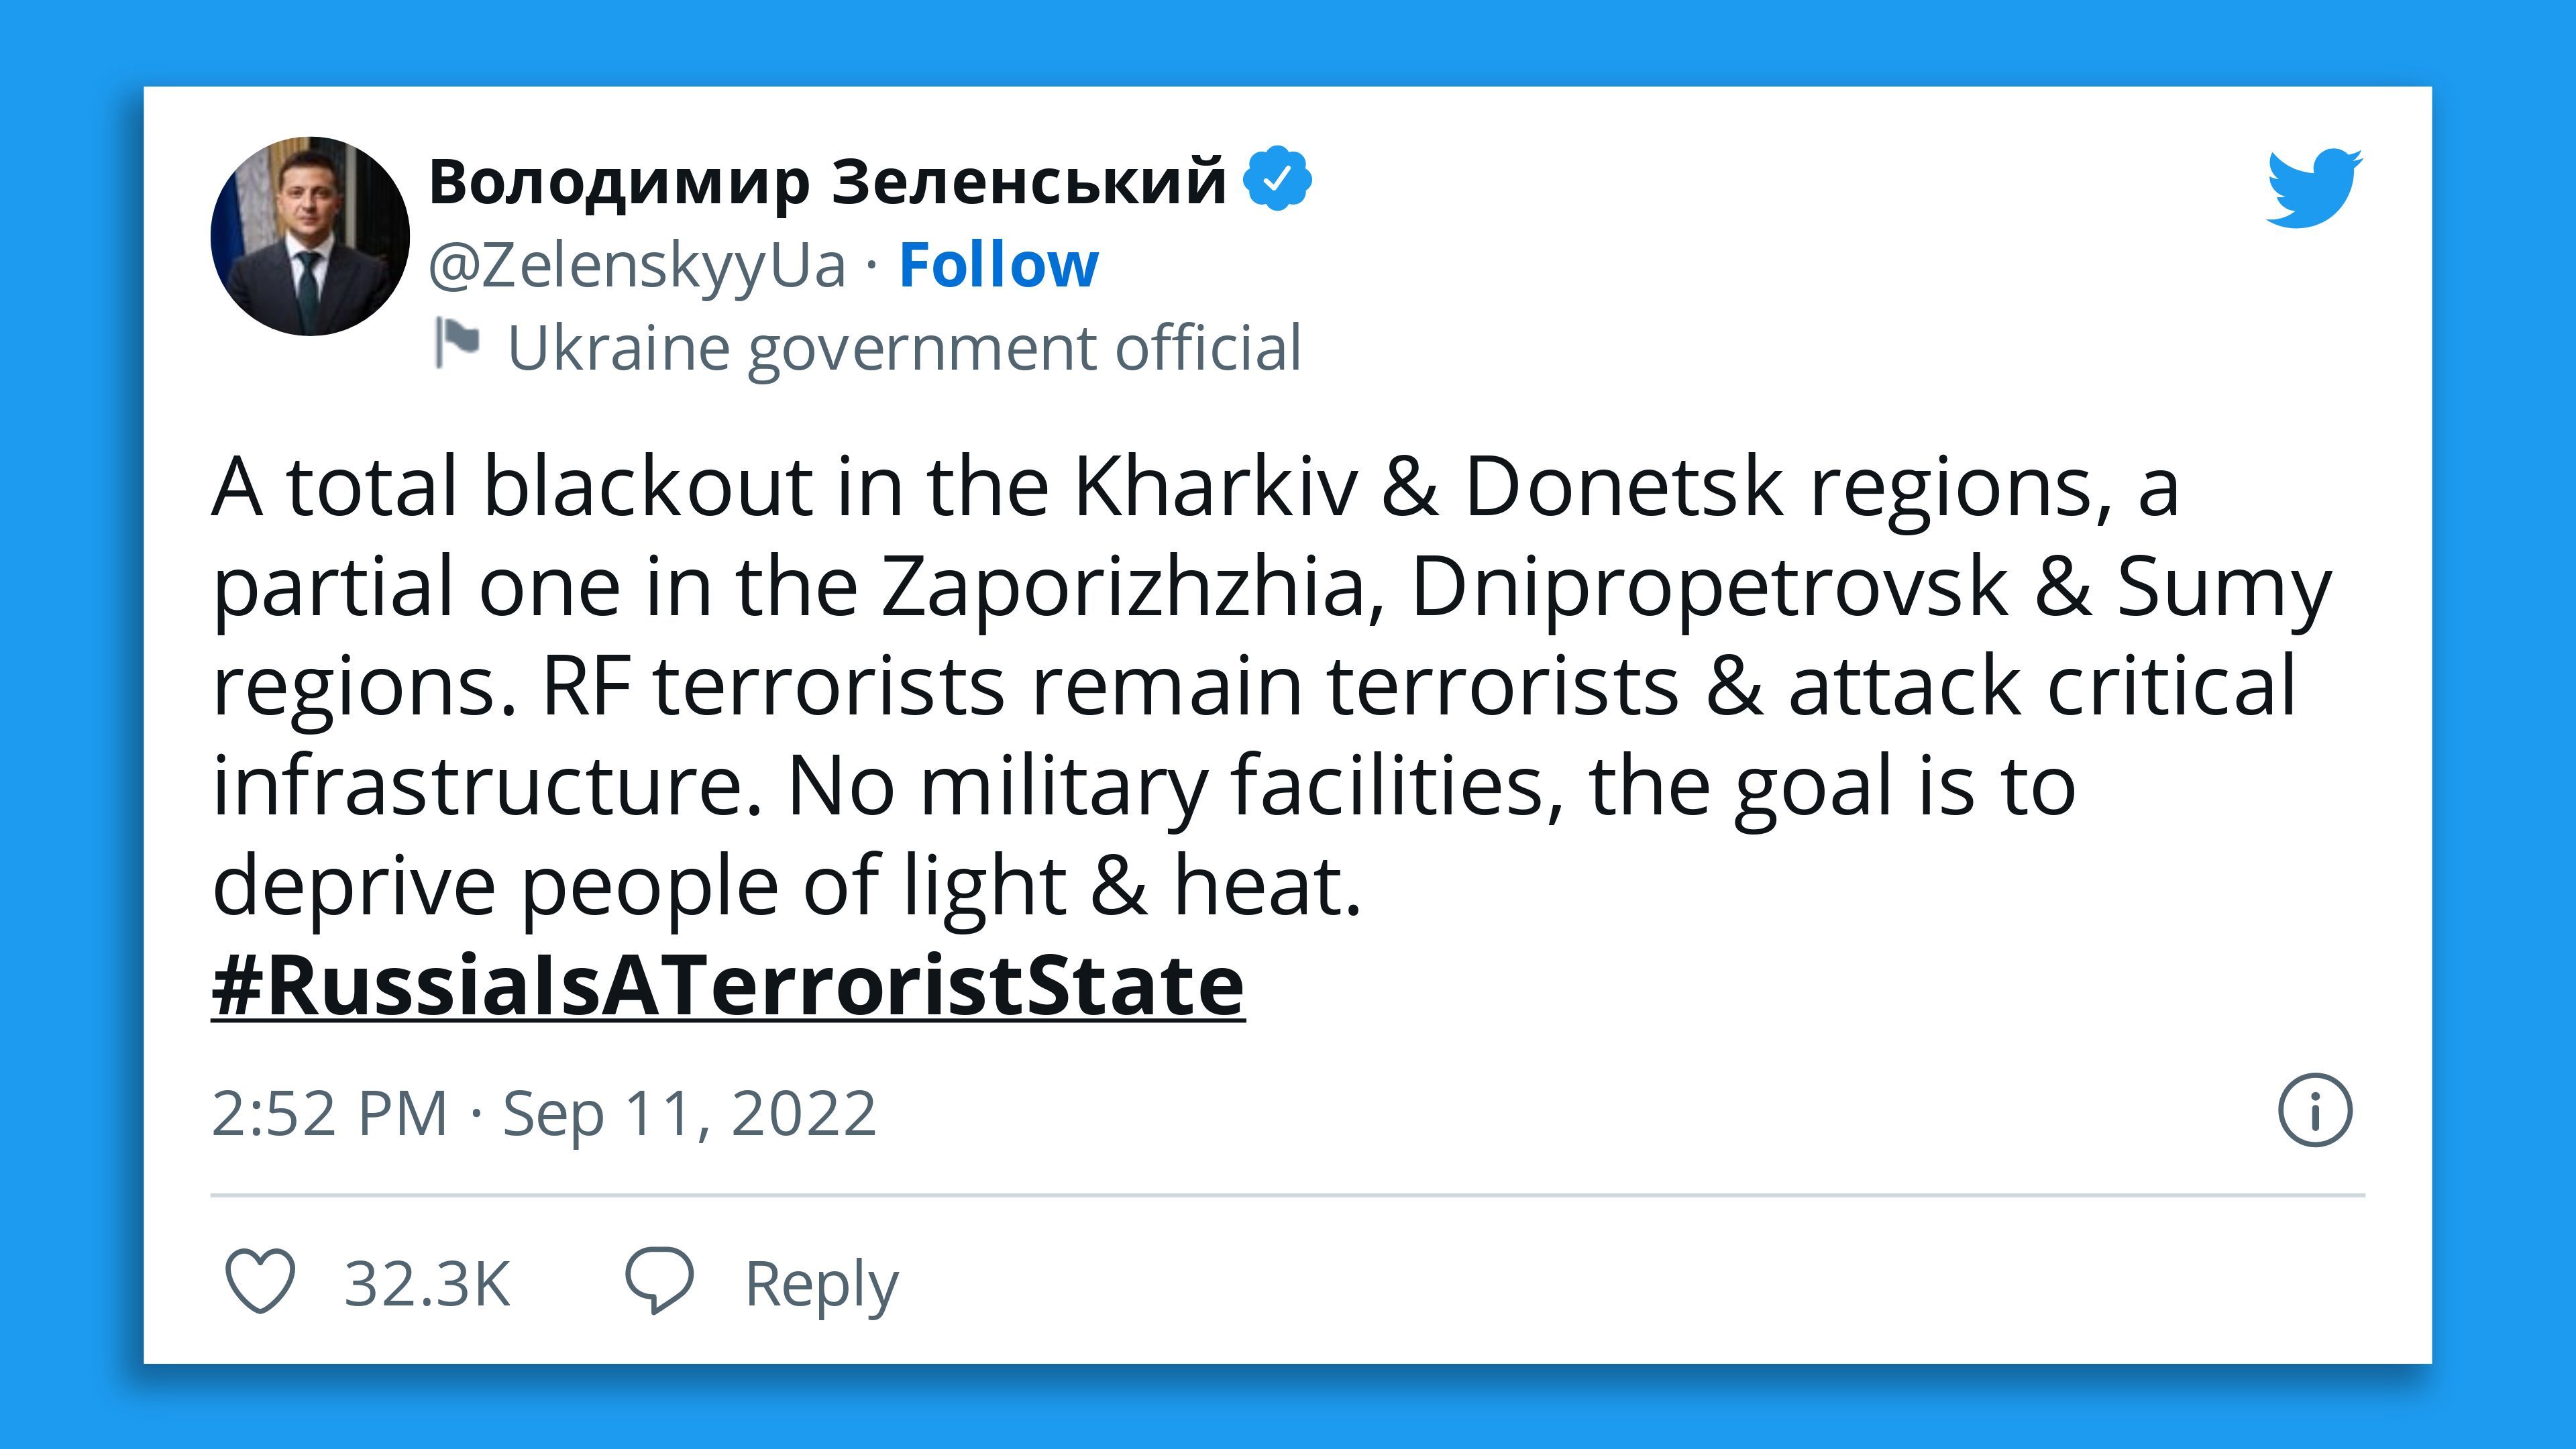 A tweet by Ukrainian President Volodymyr Zelensky condemning Russia's military attacks on infrastructure that led to blackouts, affecting civilians.